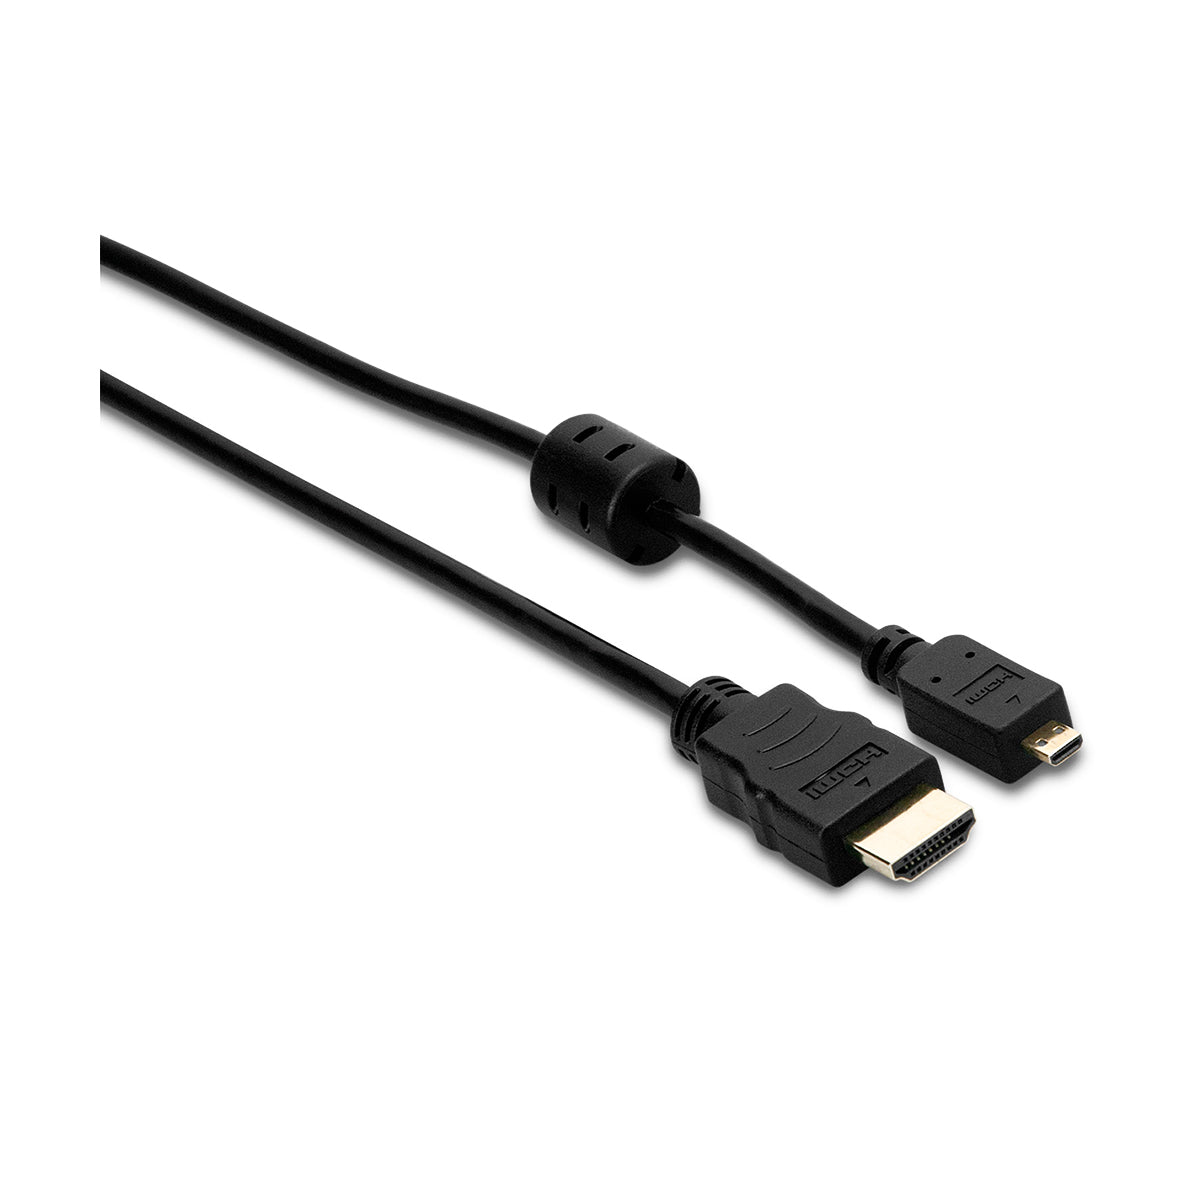 Hosa High Speed HDMI Cable - HDMI to HDMI Micro, 6 ft